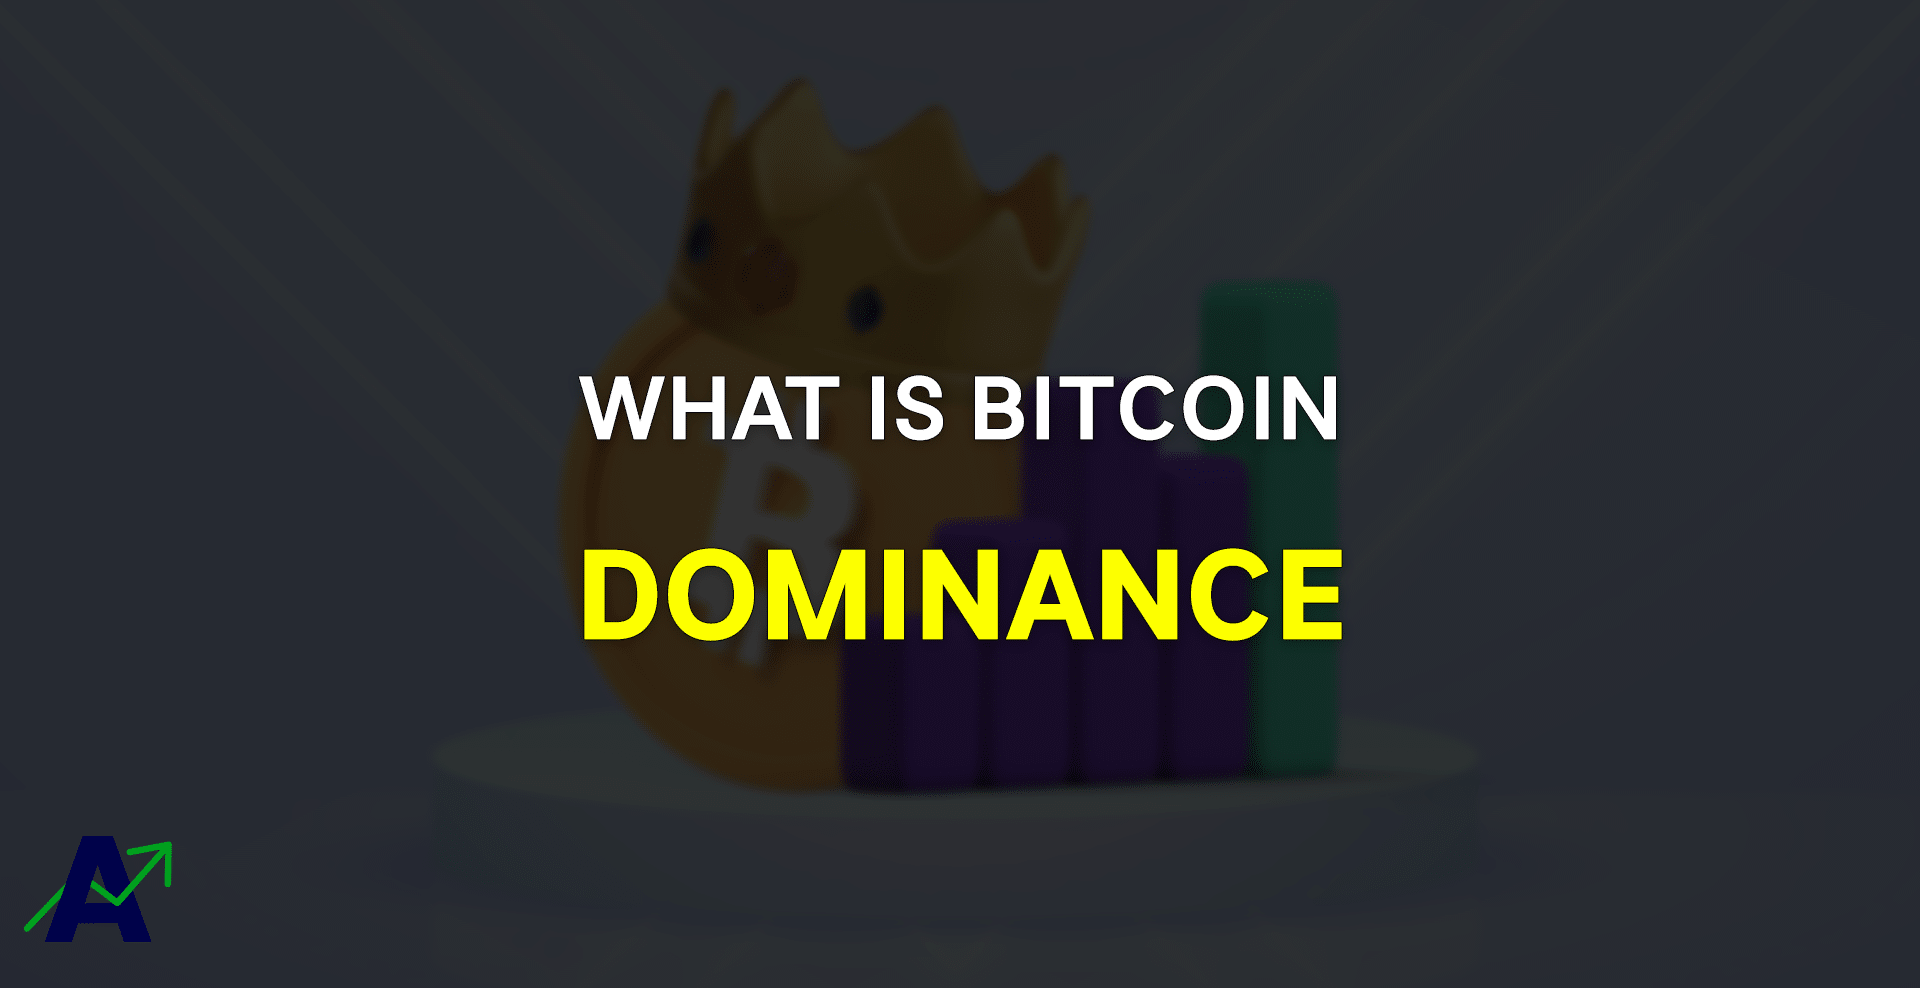 What is the Bitcoin Dominance